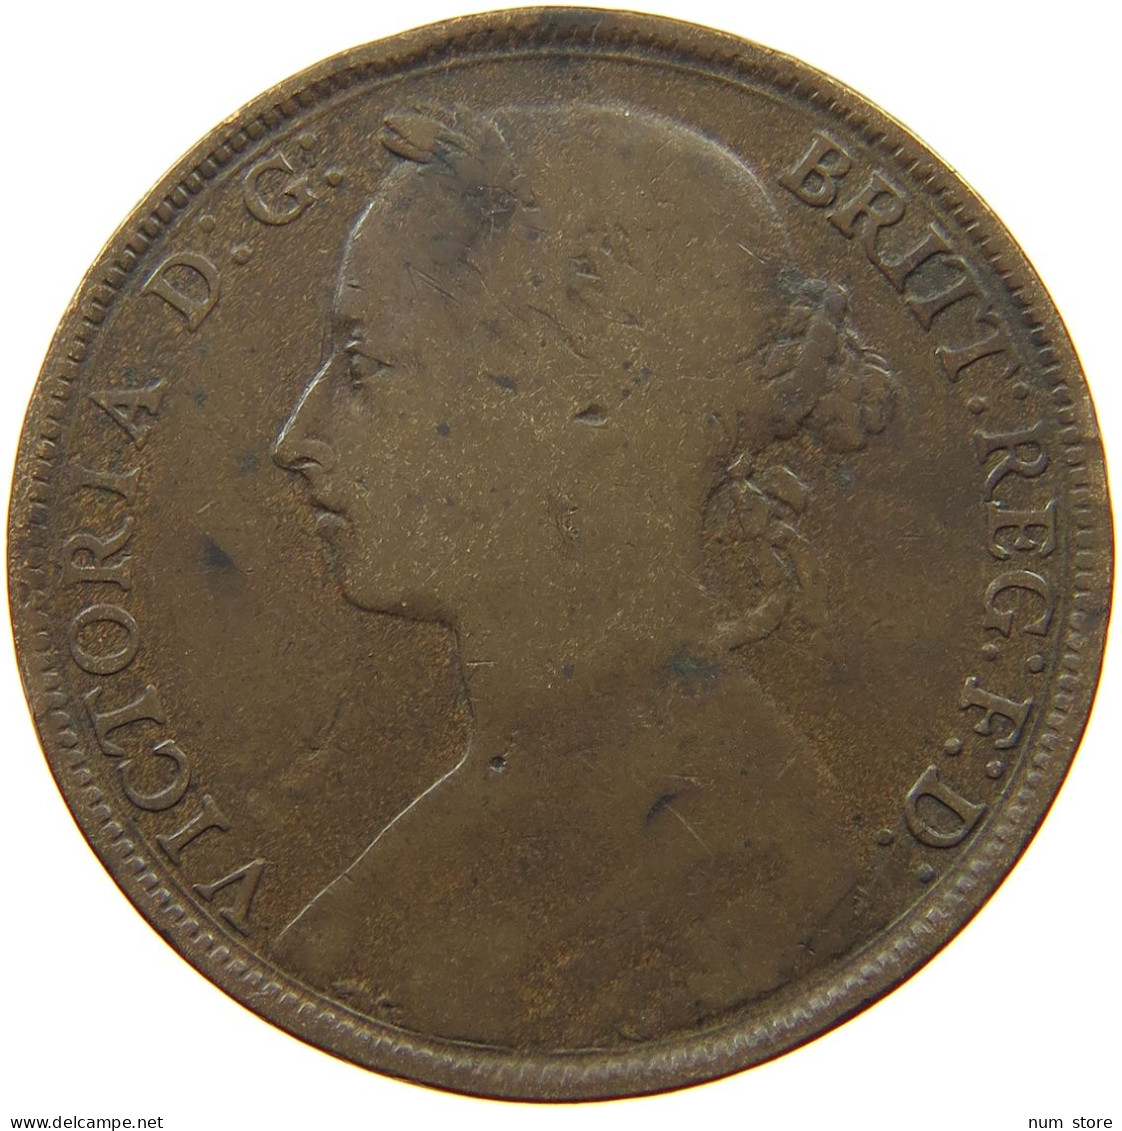 GREAT BRITAIN PENNY 1894 Victoria 1837-1901 #s046 0127 - D. 1 Penny